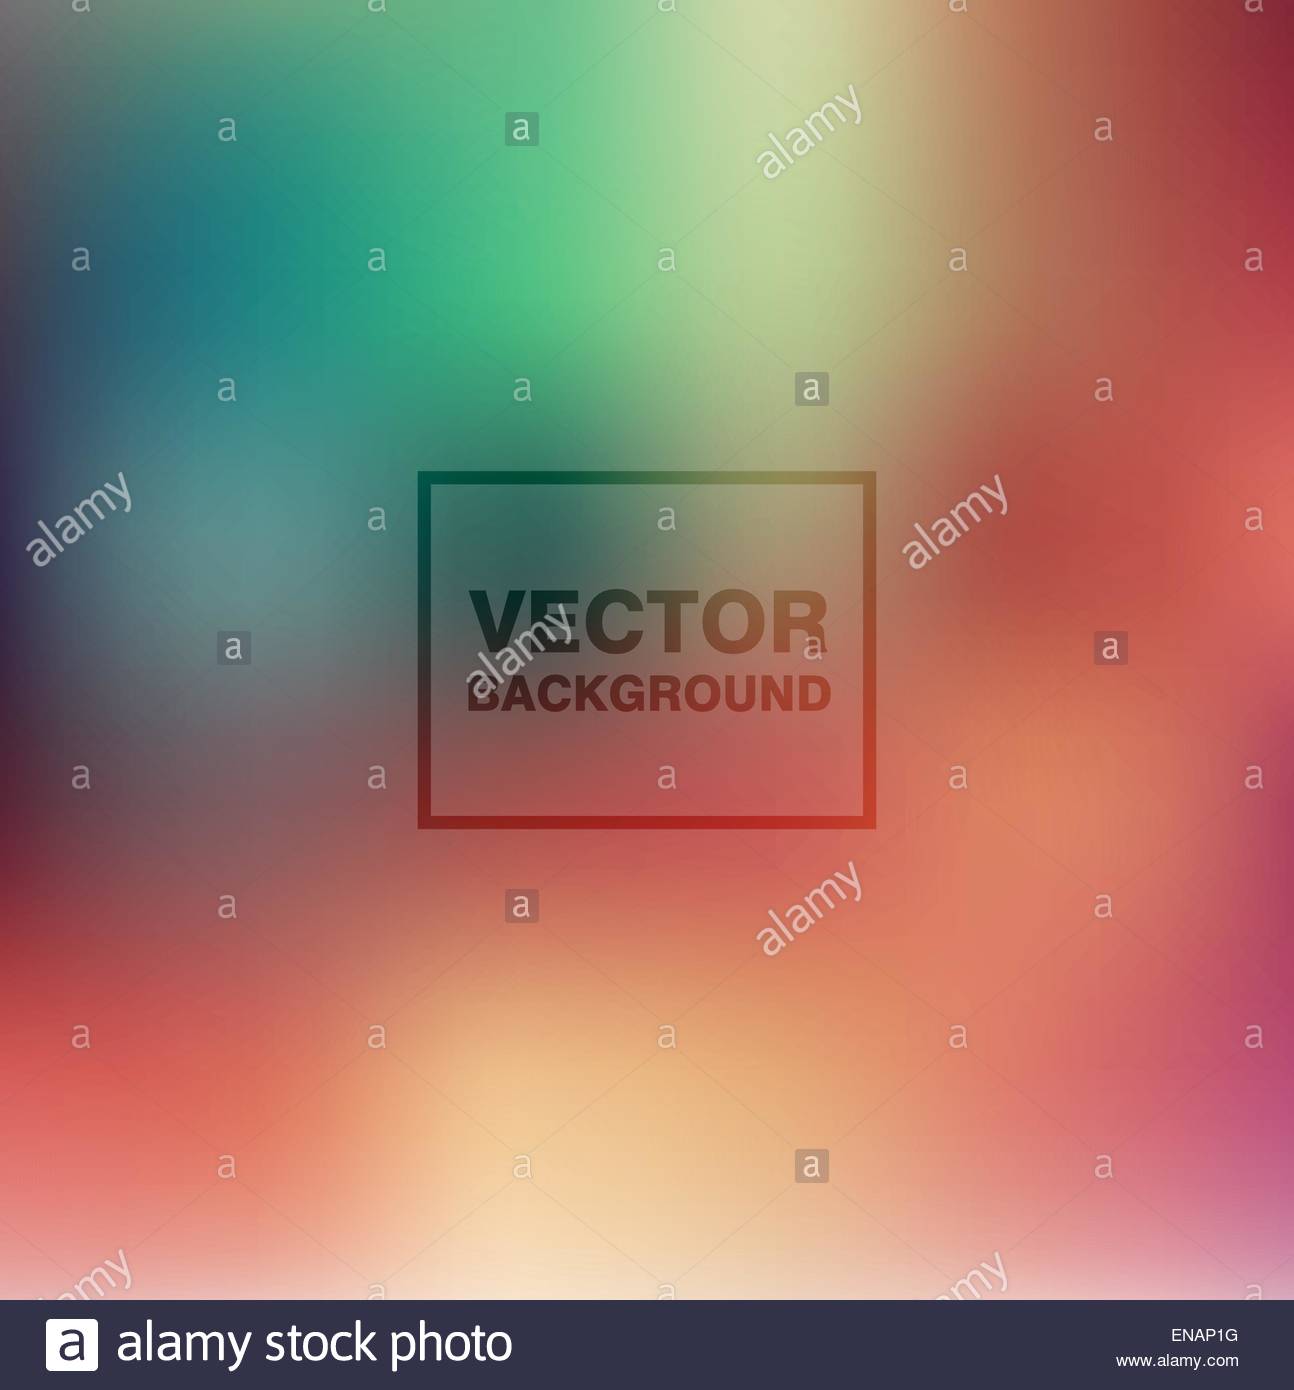 Abstract Colorful Blurred Vector Background Smooth Wallpaper For